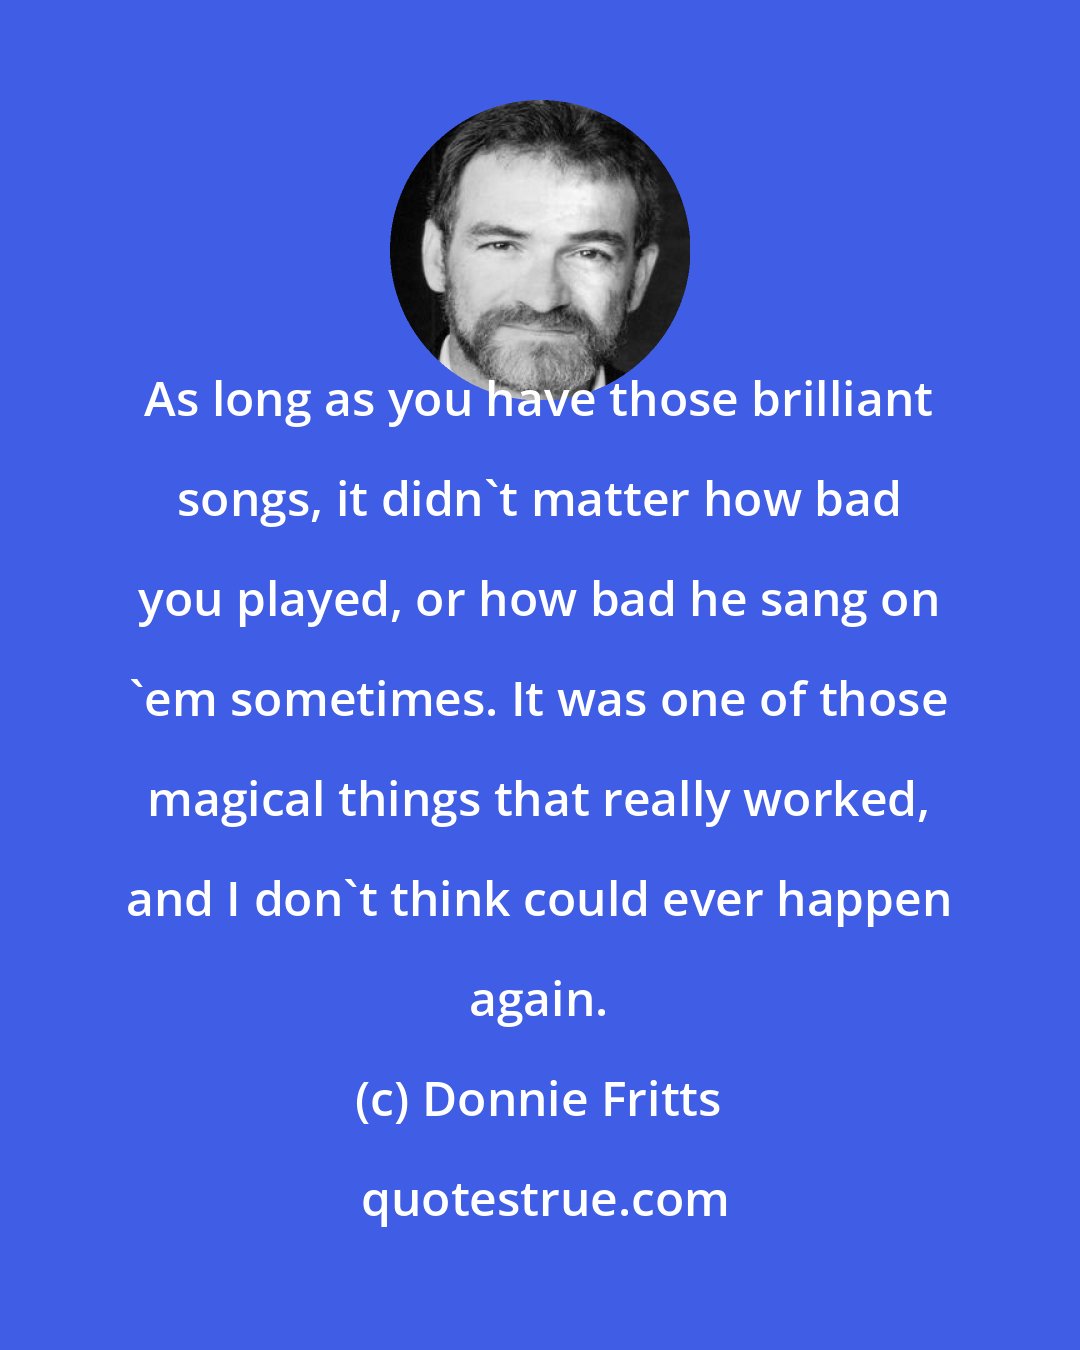 Donnie Fritts: As long as you have those brilliant songs, it didn't matter how bad you played, or how bad he sang on 'em sometimes. It was one of those magical things that really worked, and I don't think could ever happen again.